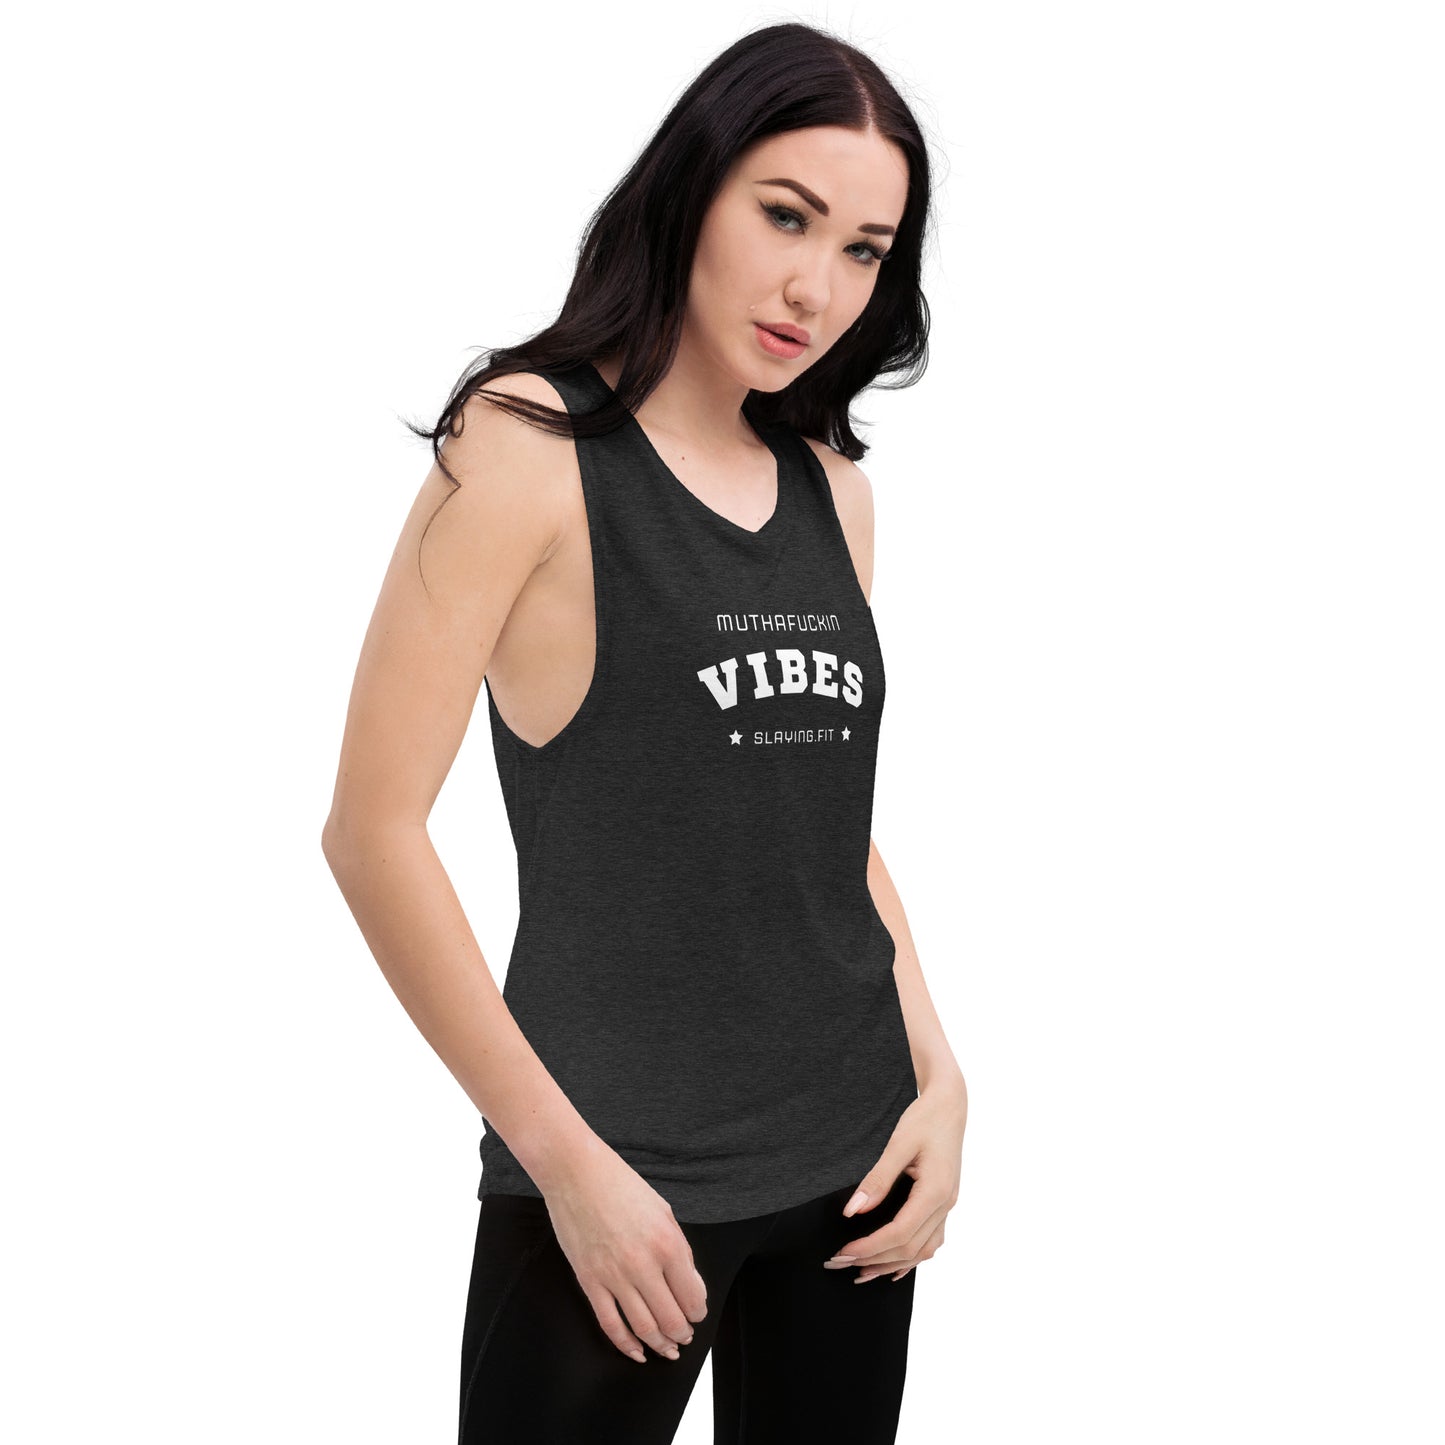 Muthafuckin' Vibes - Ladies’ Muscle Tank